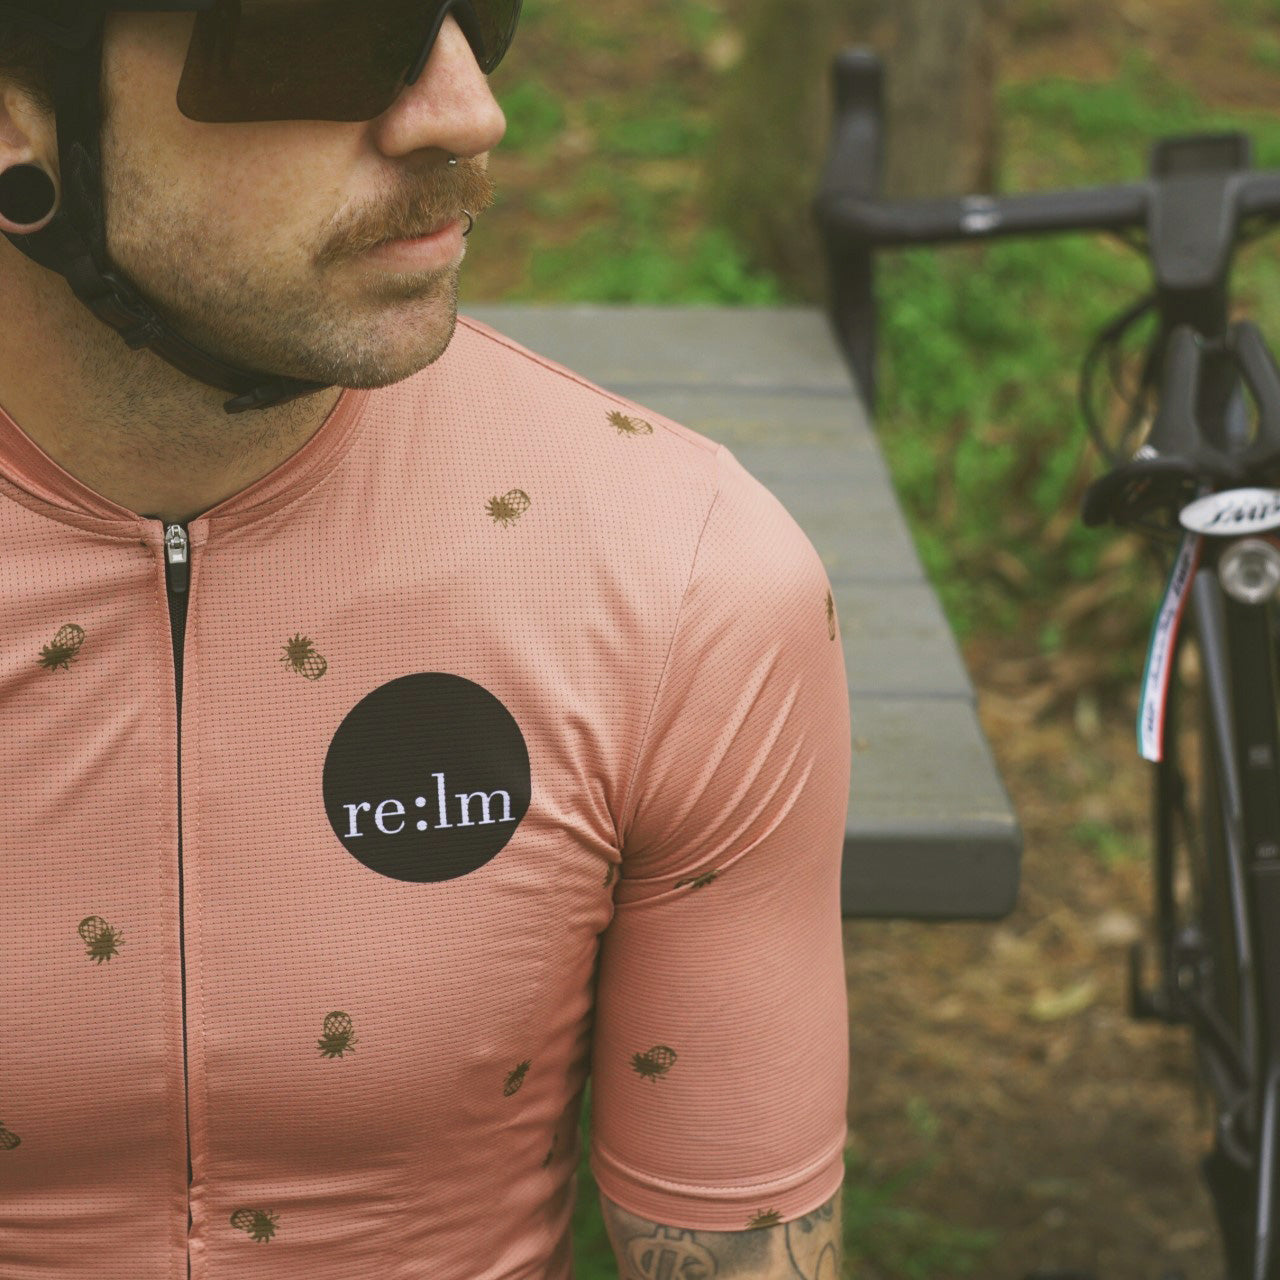 Man wearing Relm Cycling jersey in pines